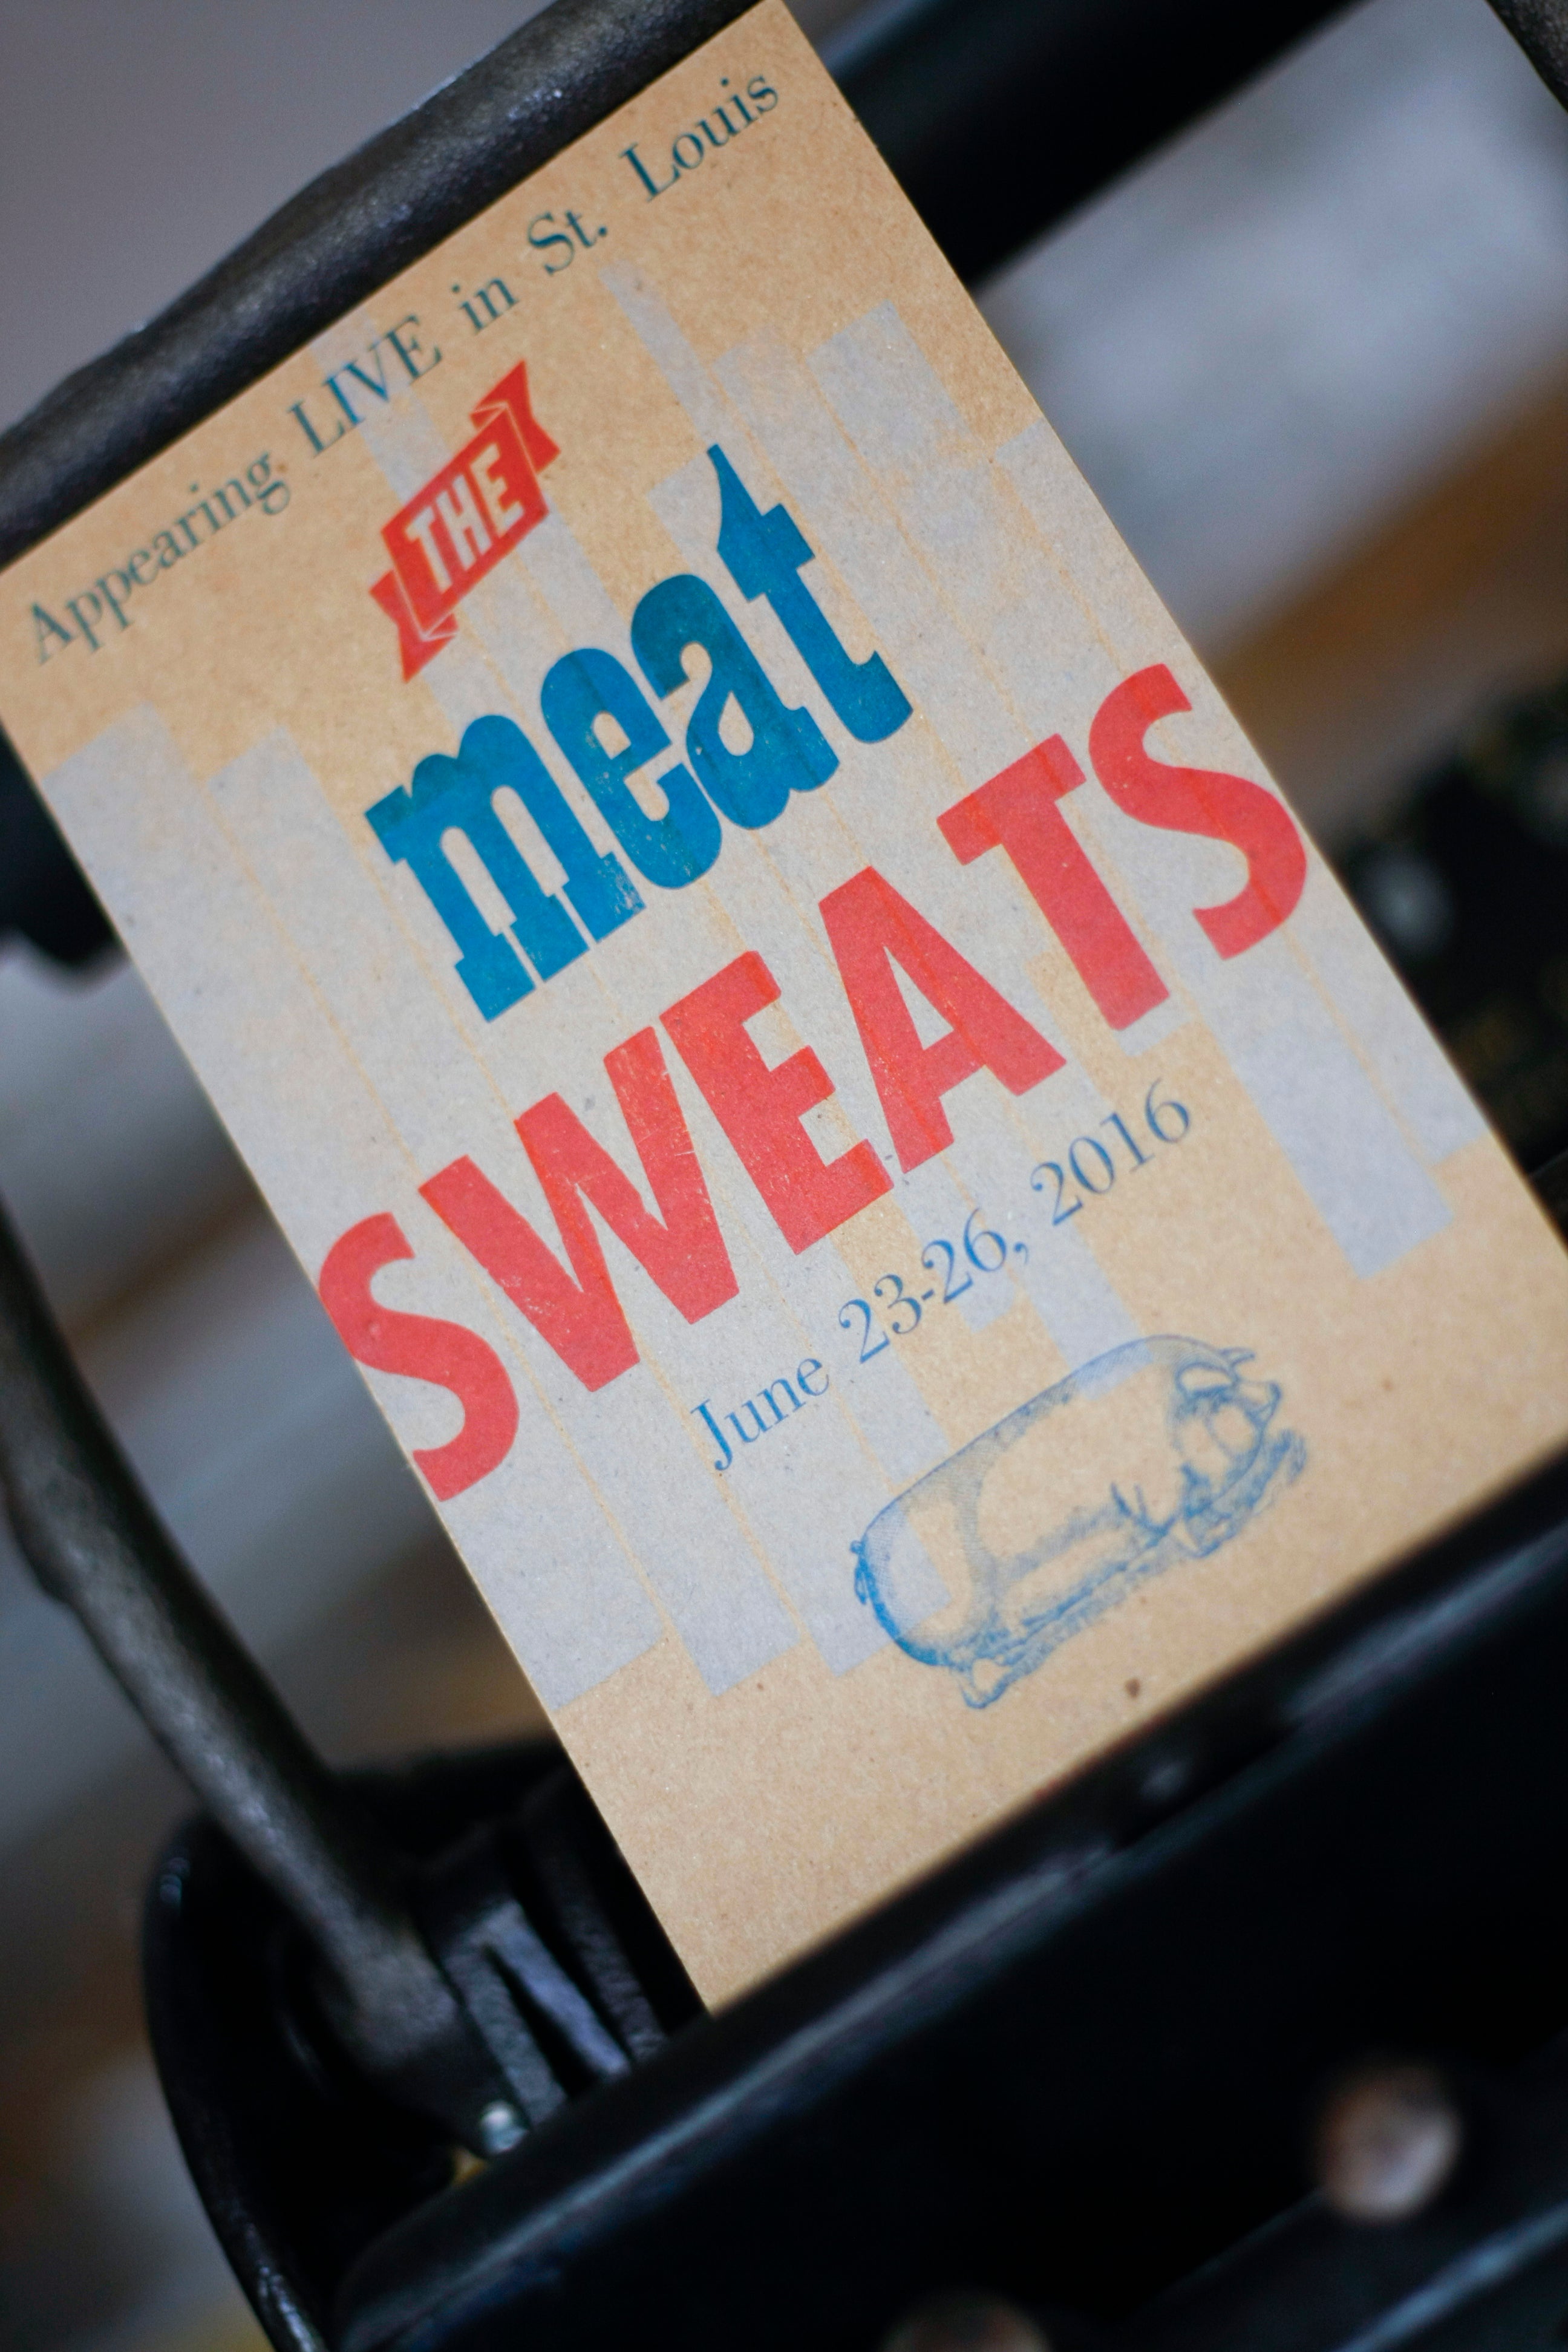 the meat sweats - letterpress print wayzgoose dogs and stars custom printing or printing for the hell of it